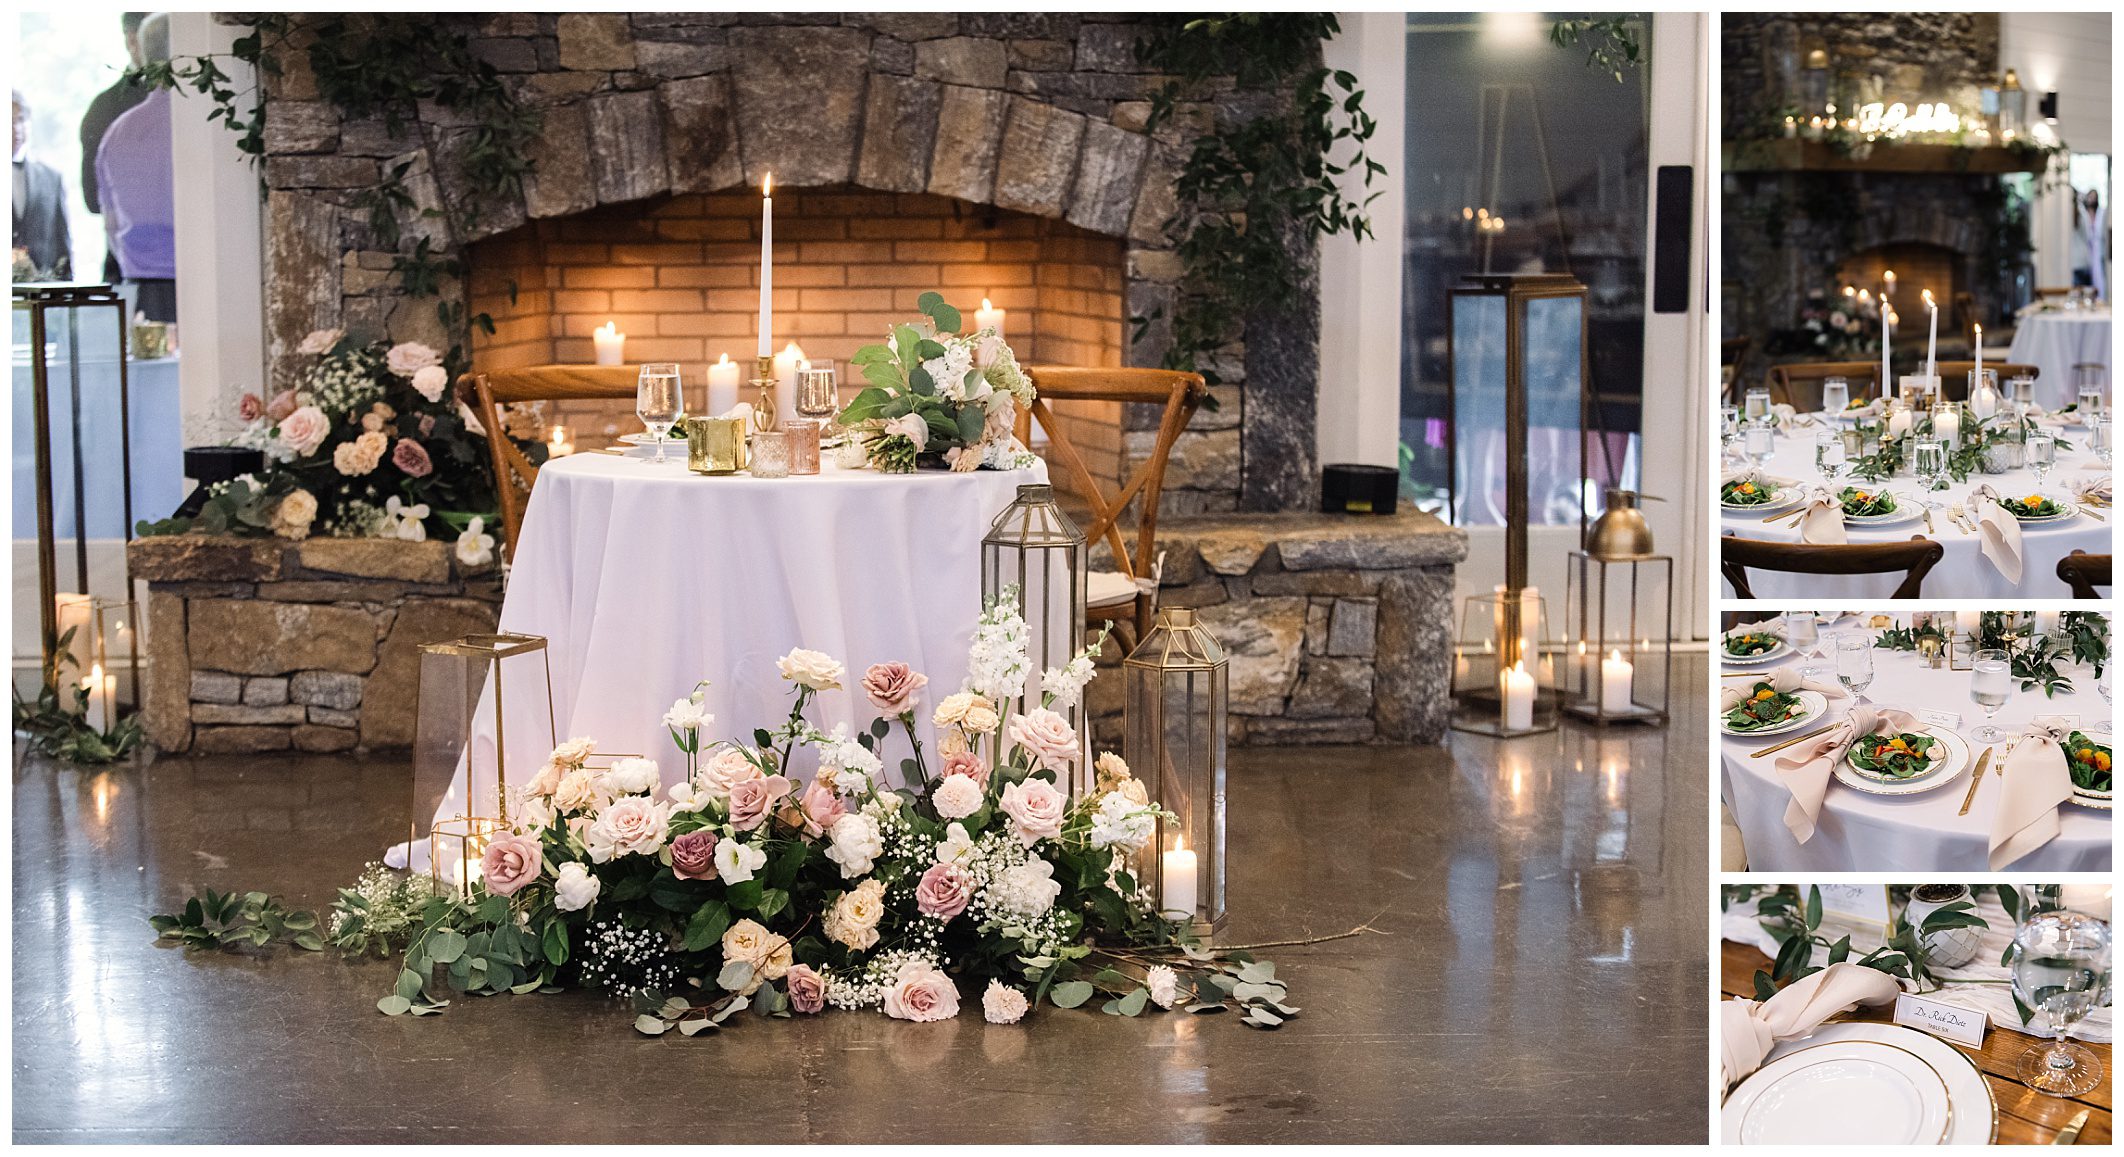 Elegant mountain wedding reception venue at Chestnut Ridge with floral decorations, candle lanterns, a fireplace, and a set dining table.